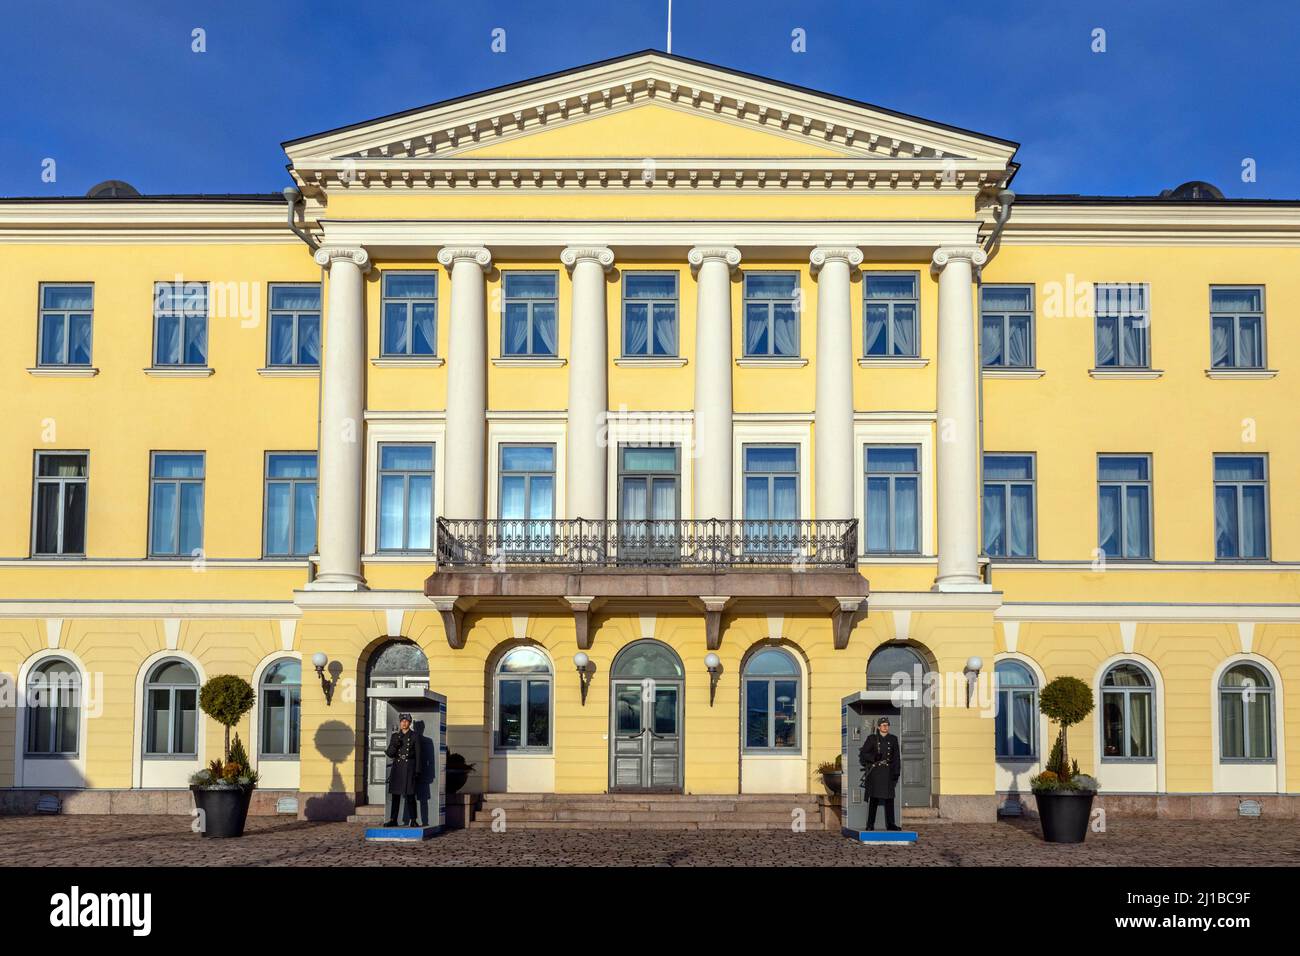 REPUBLICAN GUARDS IN FRONT OF THE FACADE OF THE PRESIDENTIAL PALACE, HELSINKI, FINLAND, EUROPE Stock Photo